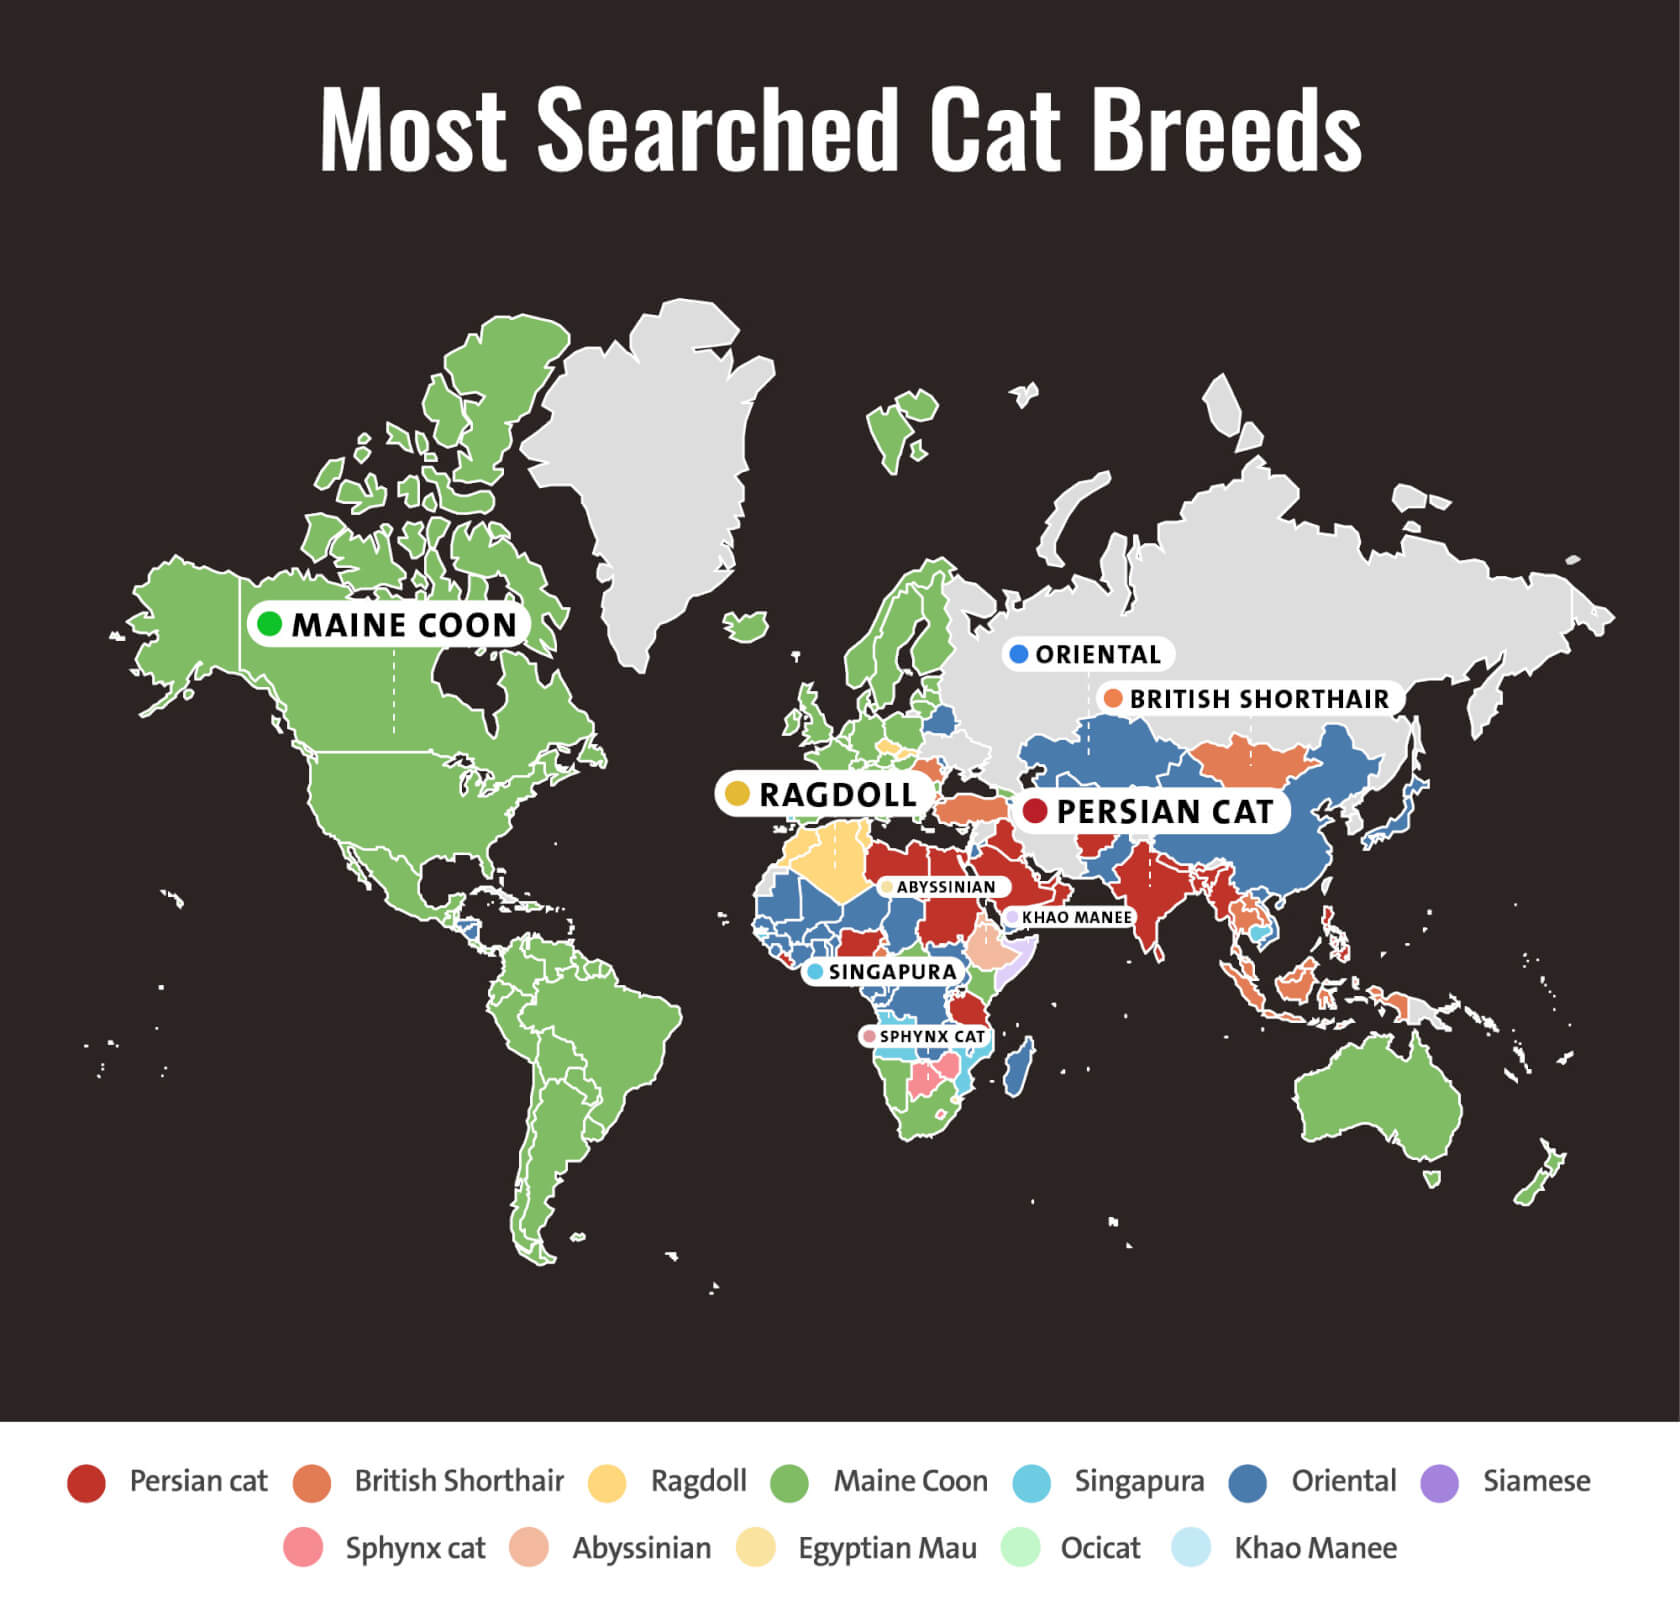 Map showing the most searched cat breeds around the world.